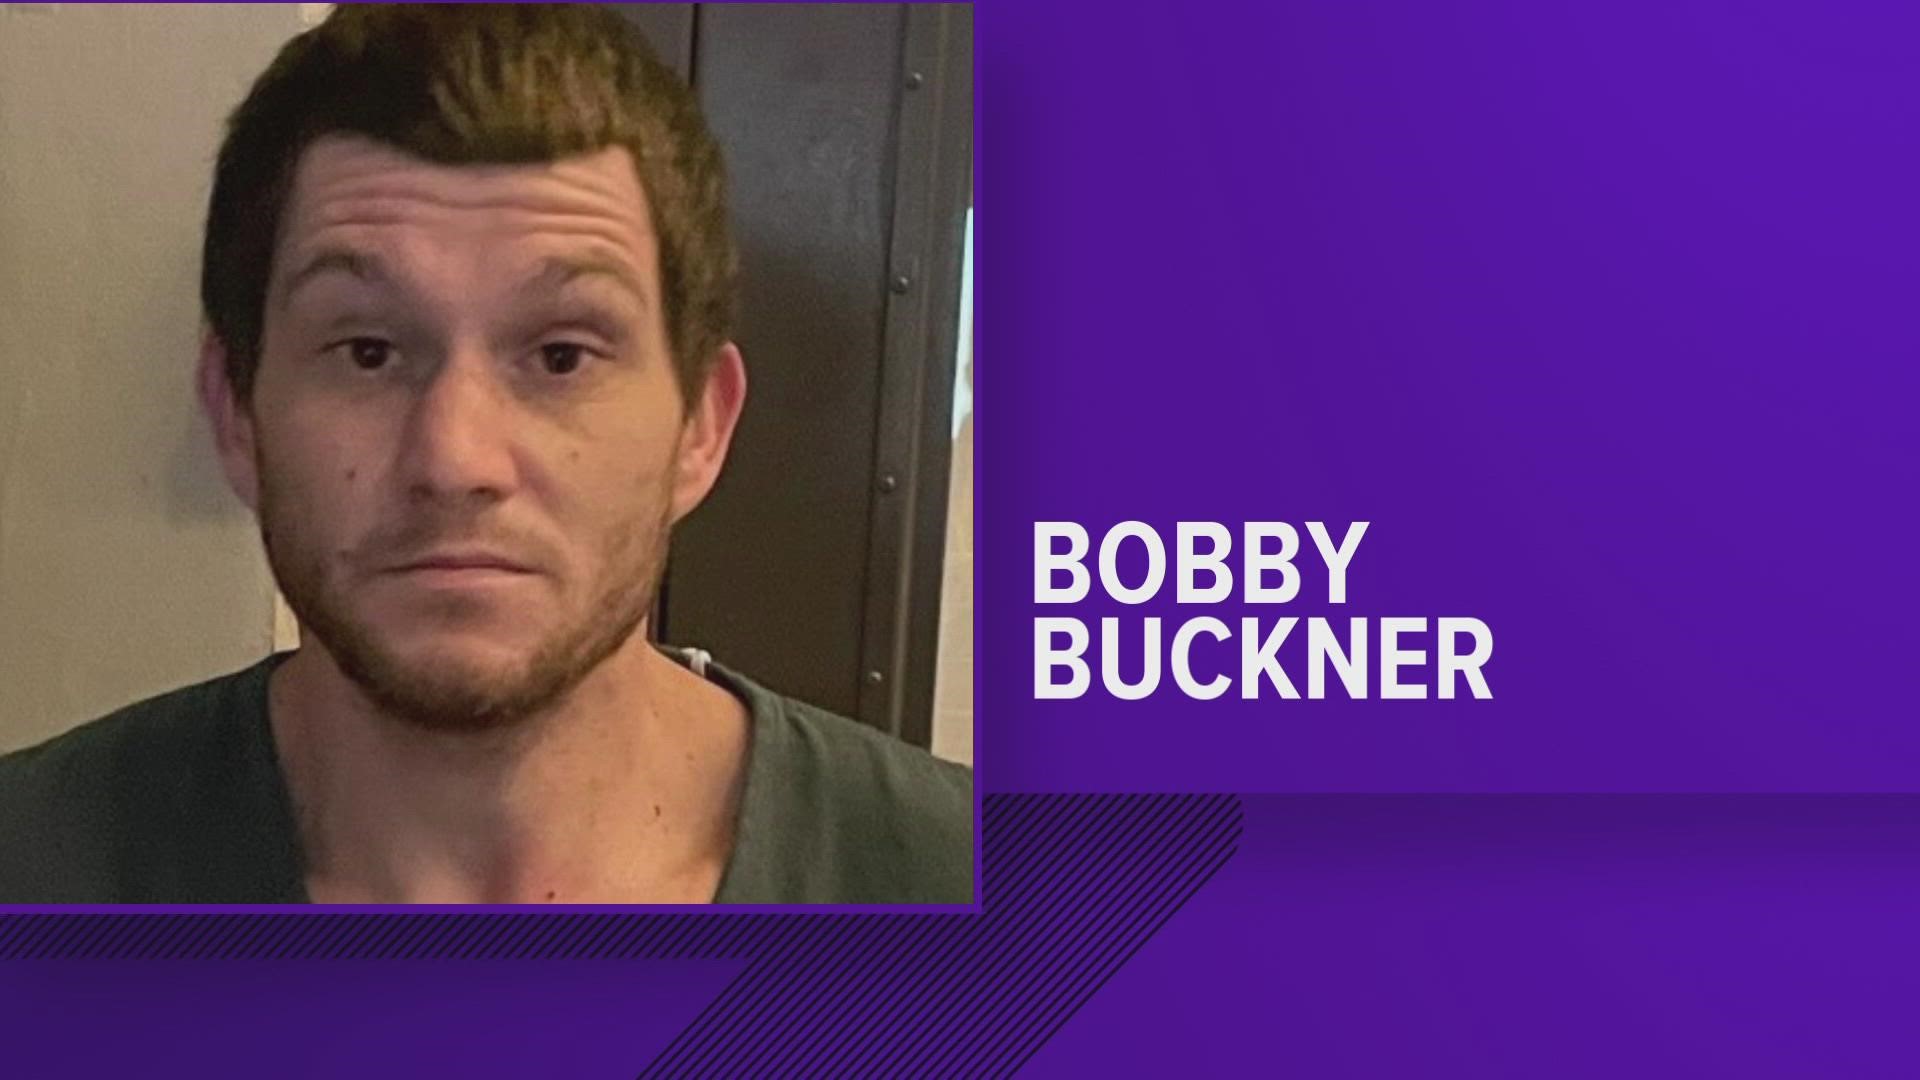 Bobby Bucker is charged with arson and reckless endangerment for starting the house fire.